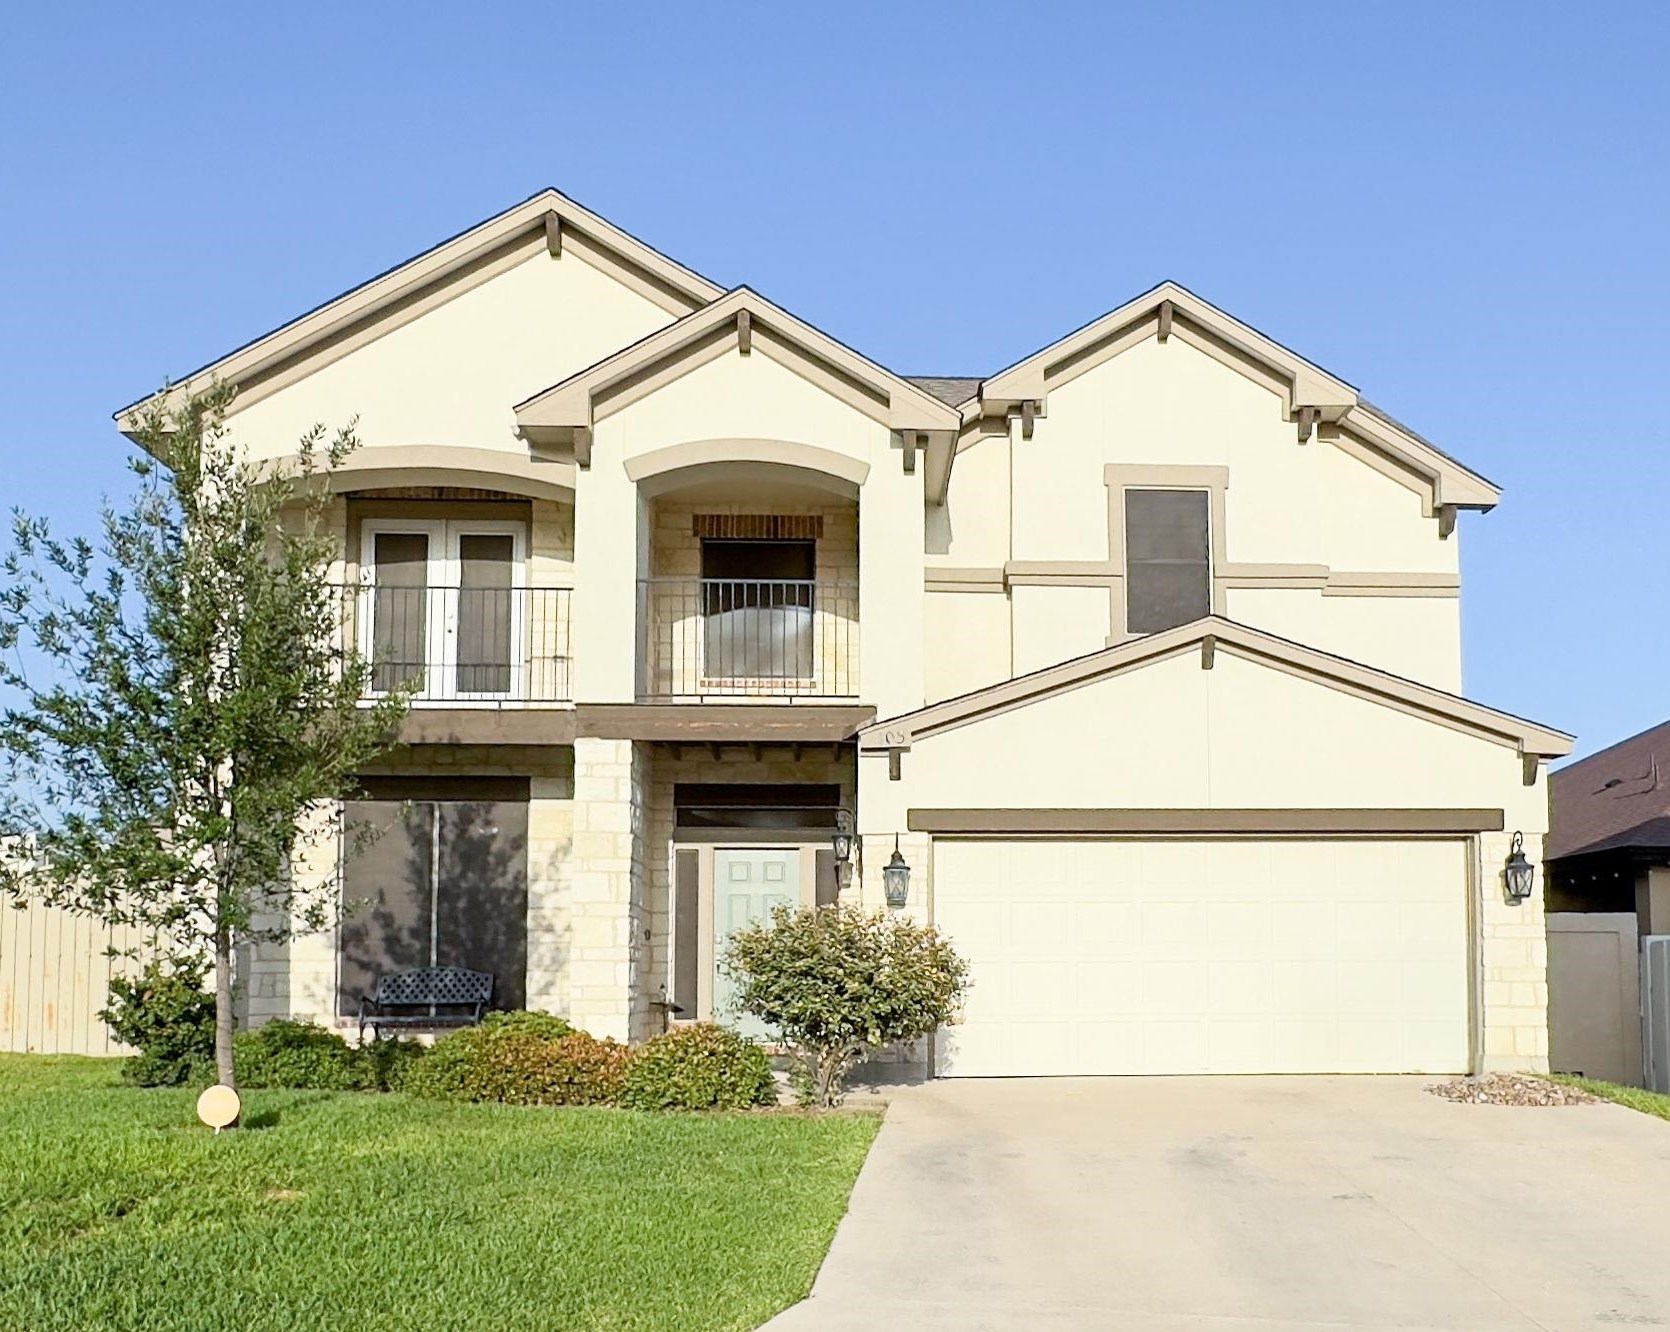 Homes for Sale in Laredo, TX with Virtual Tours